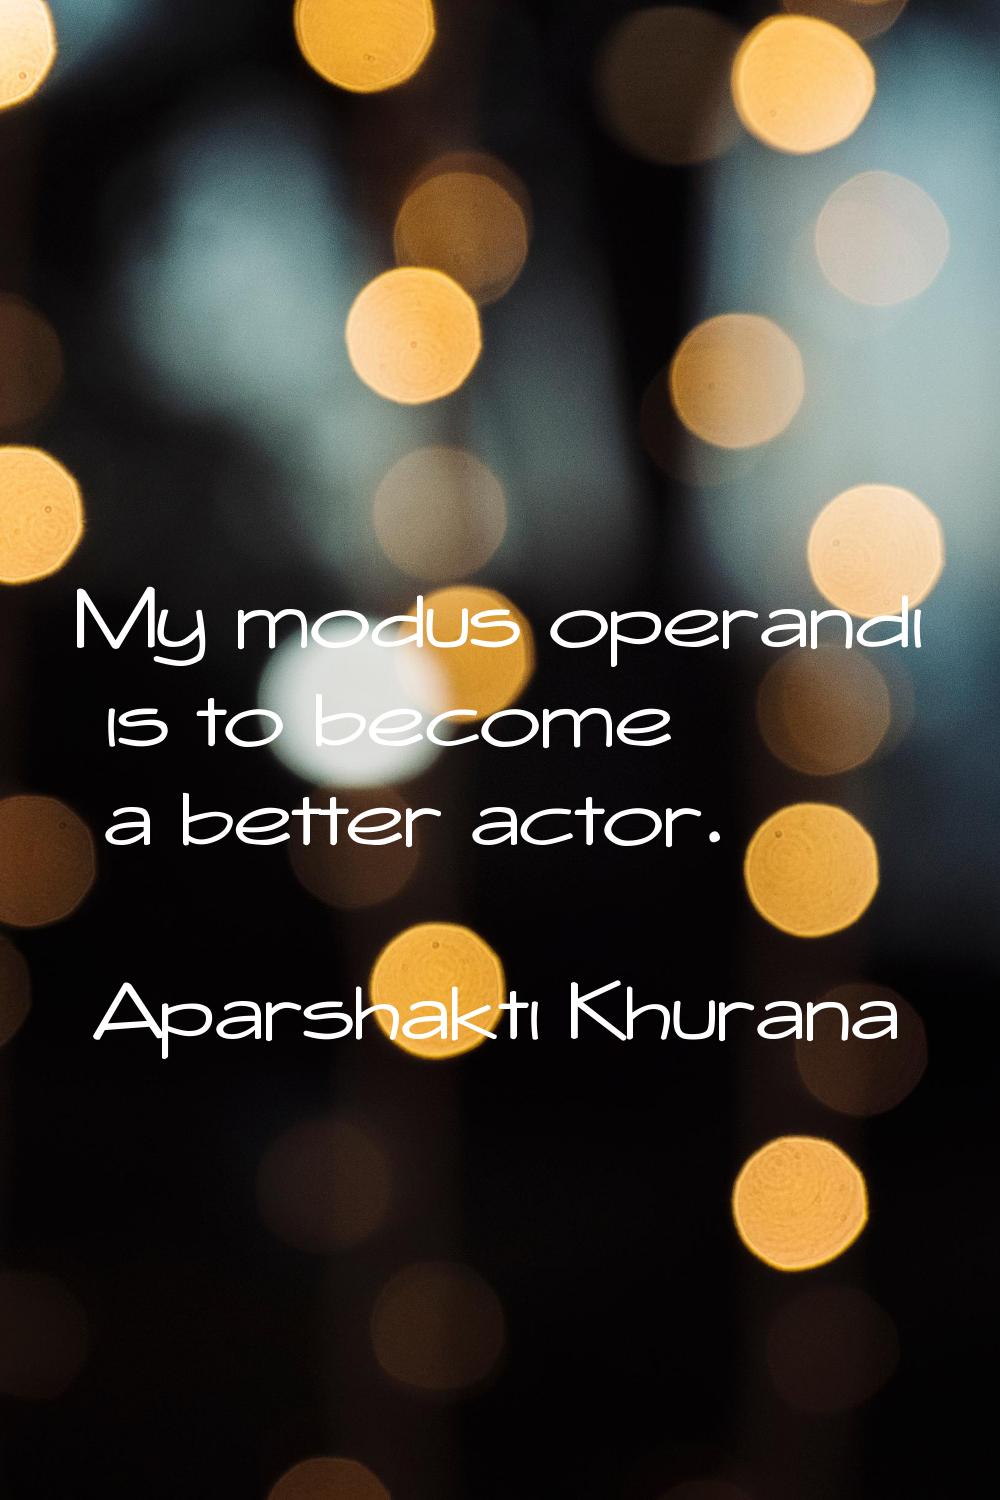 My modus operandi is to become a better actor.